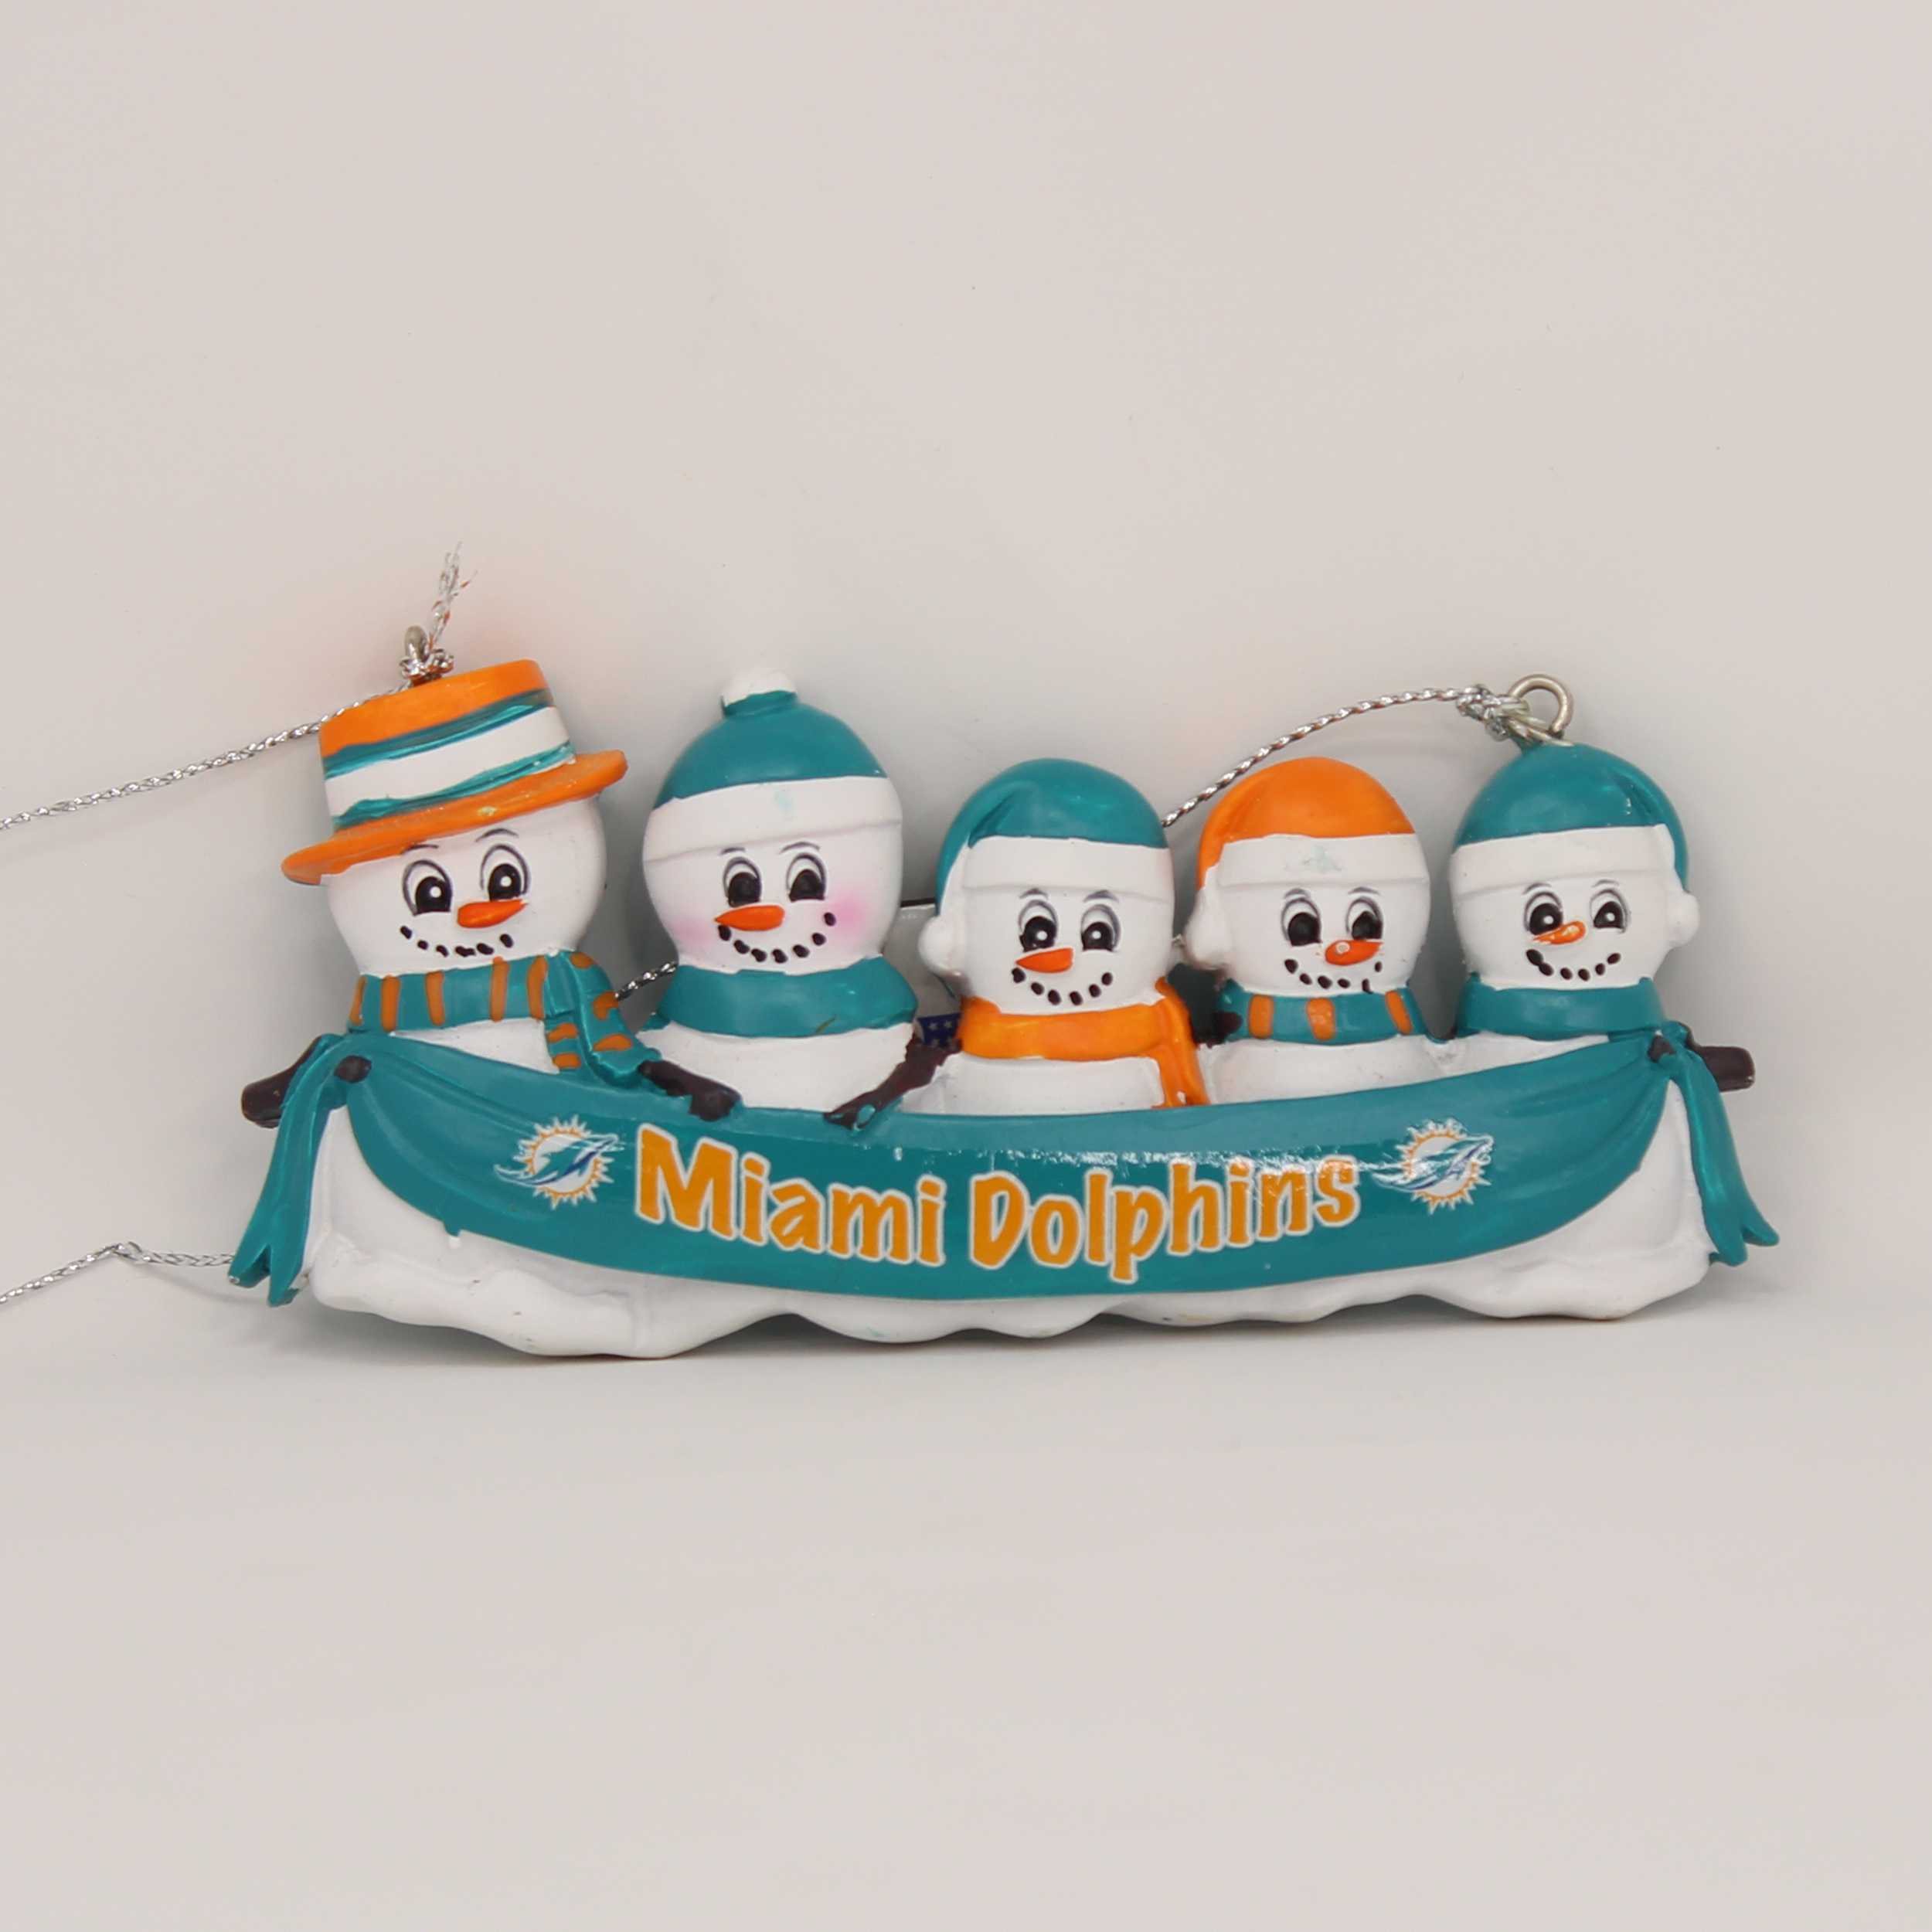 Personalized Family Ornament Miami Dolphins